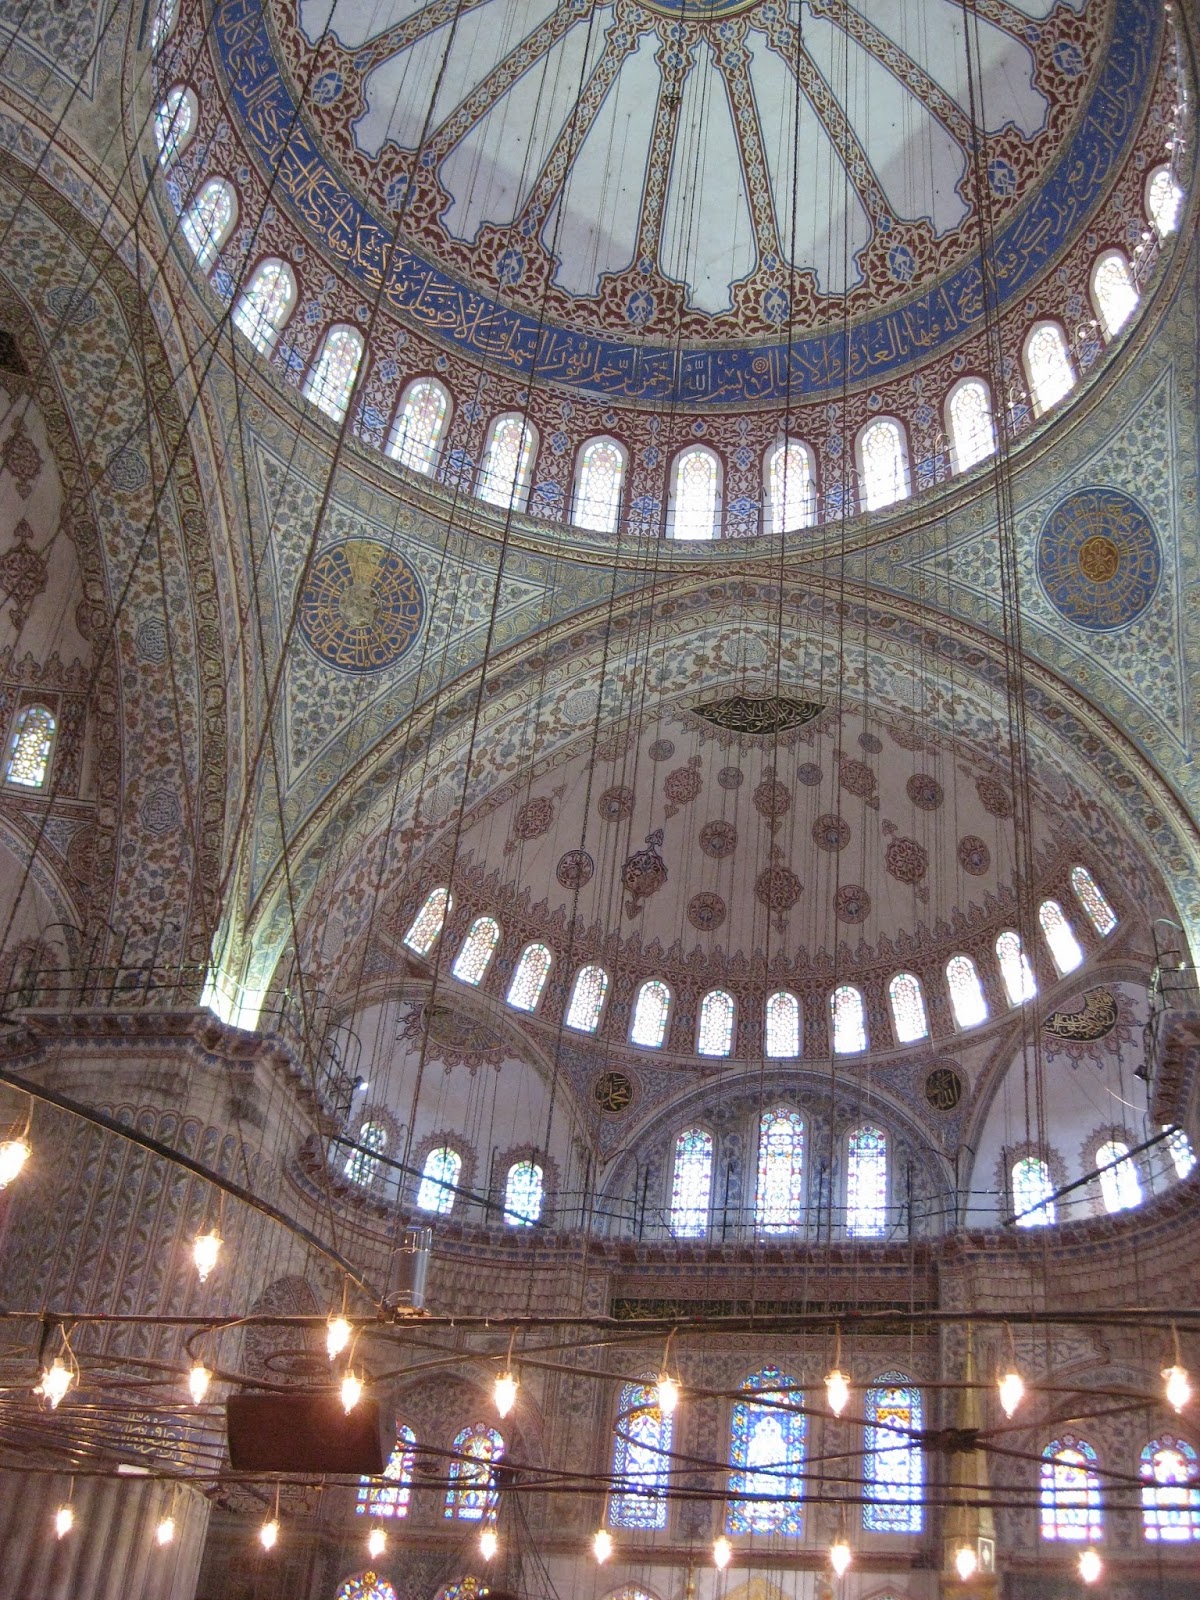 Istanbul - The ceiling and lights inside the Blue Mosque are amazing